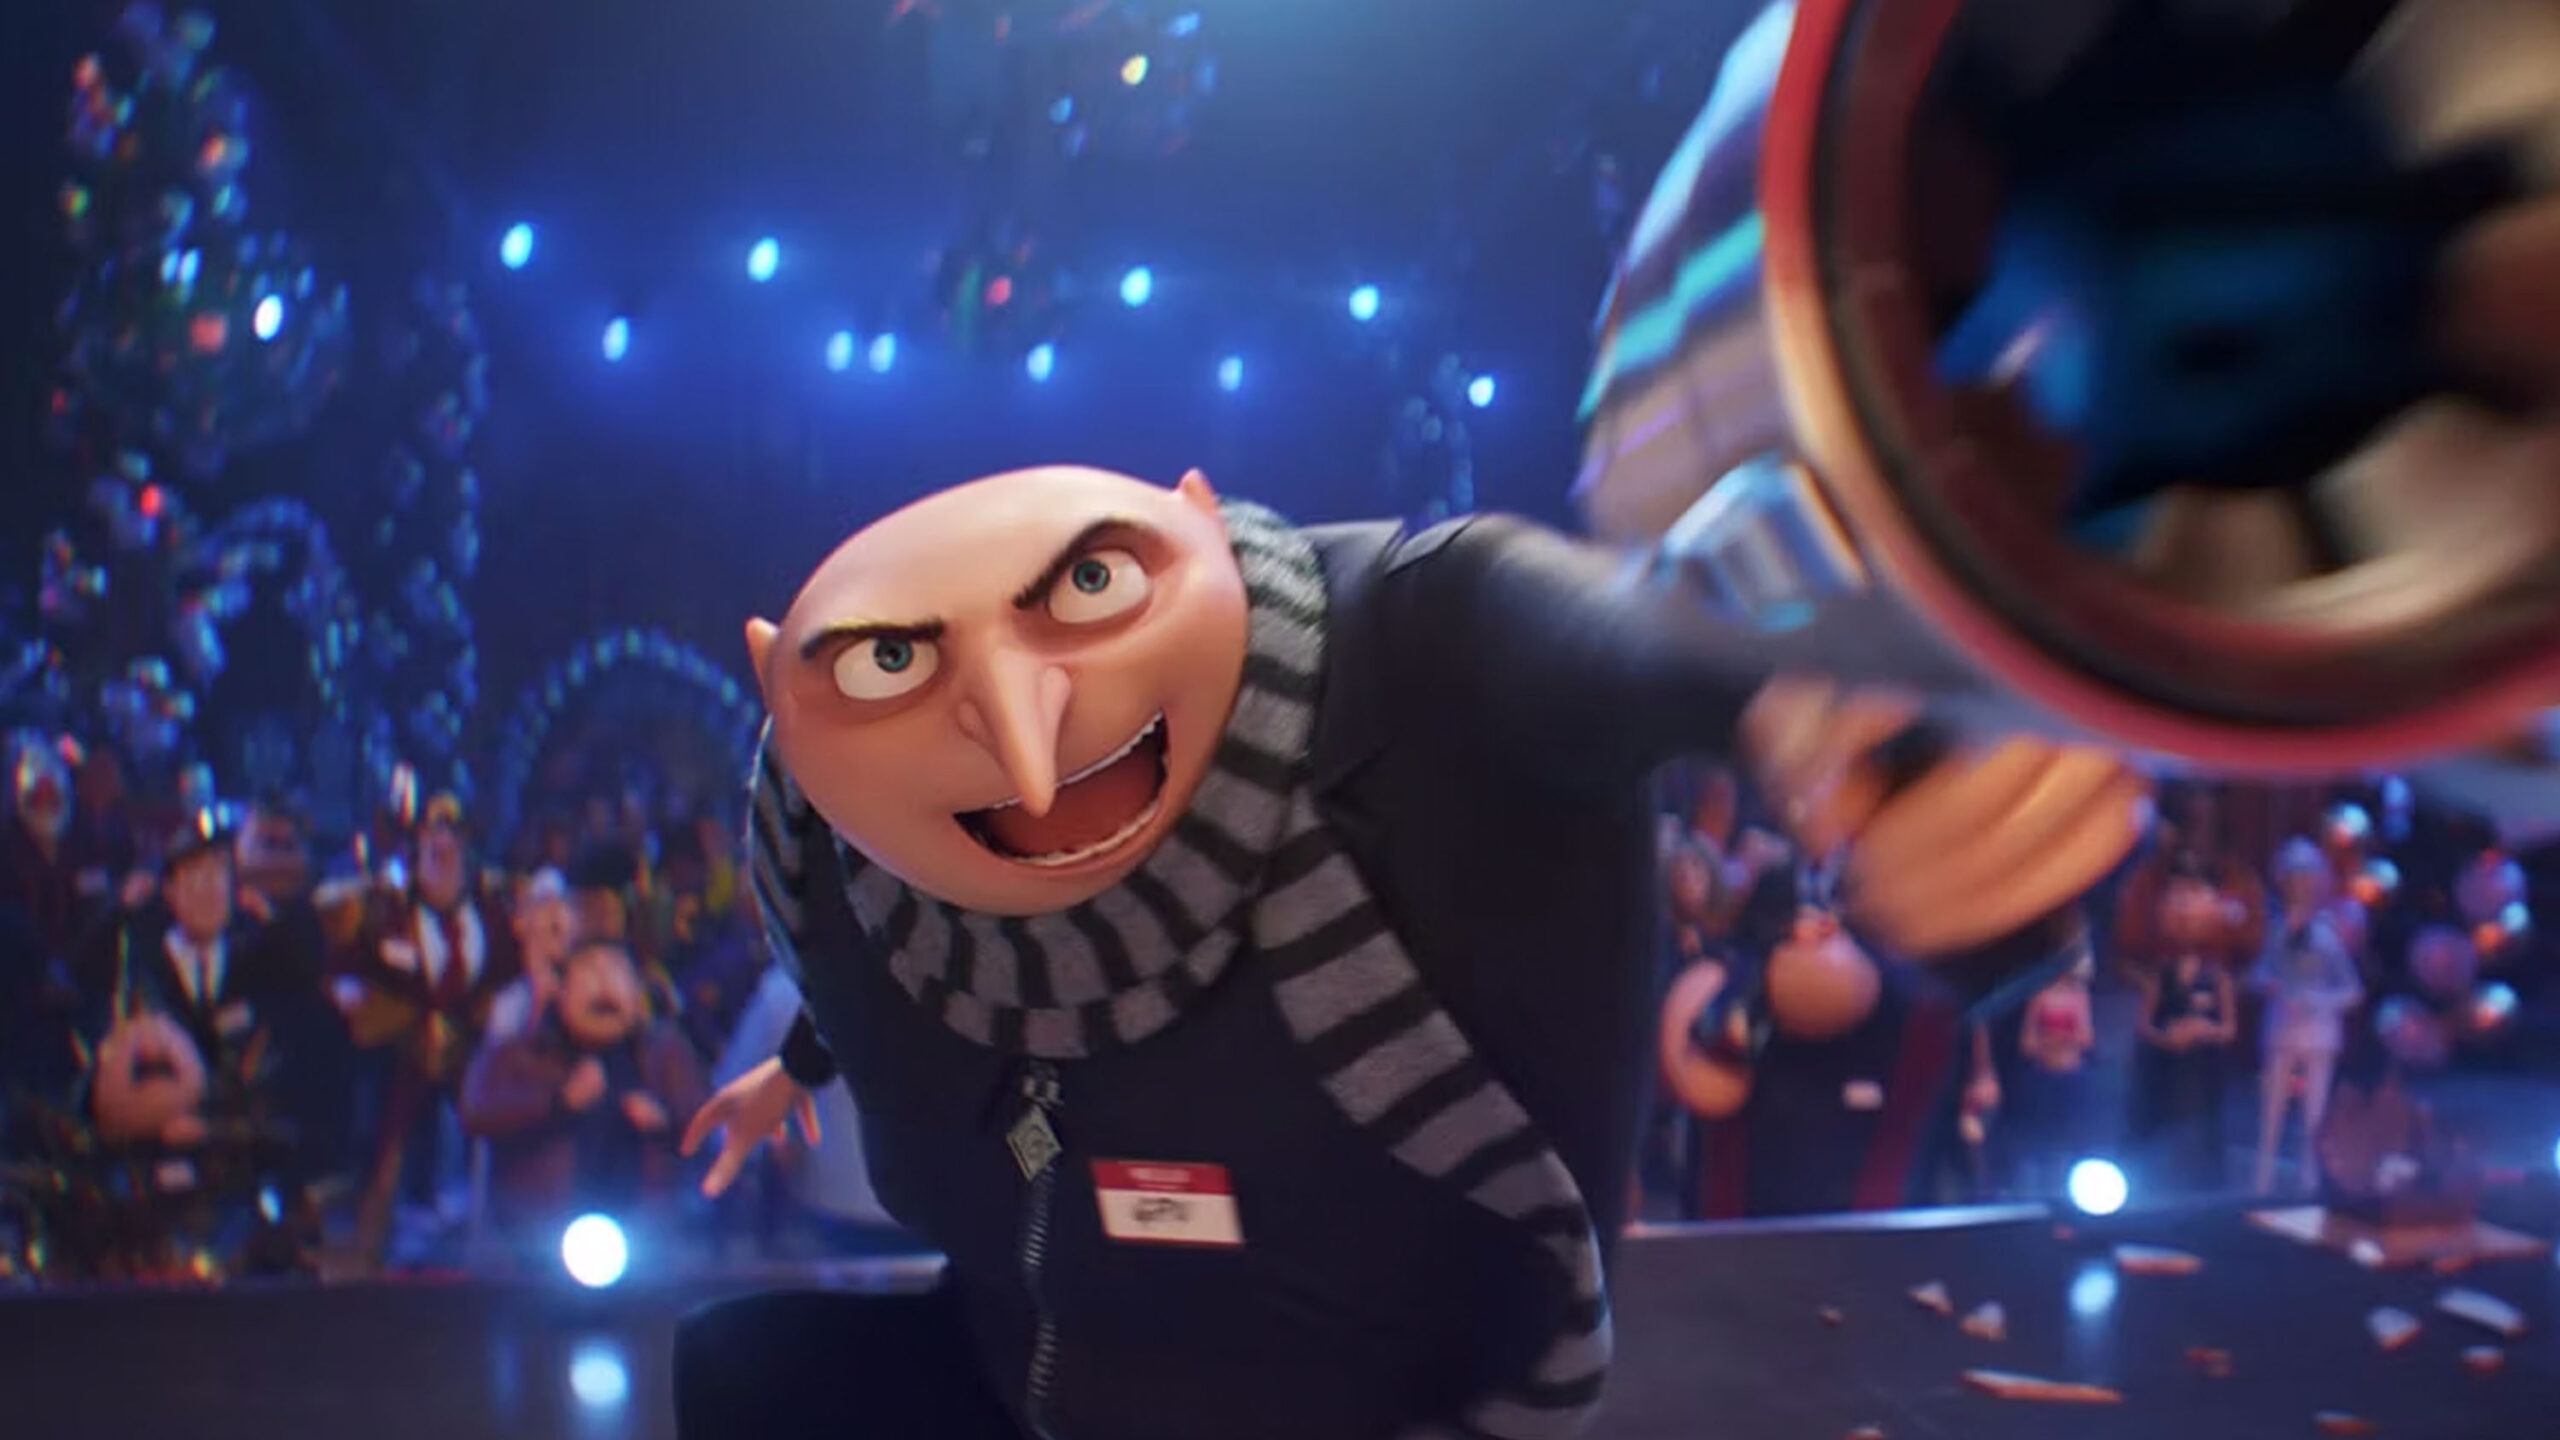 New Despicable Me 4 Trailer Teases a Funfilled Family Experience